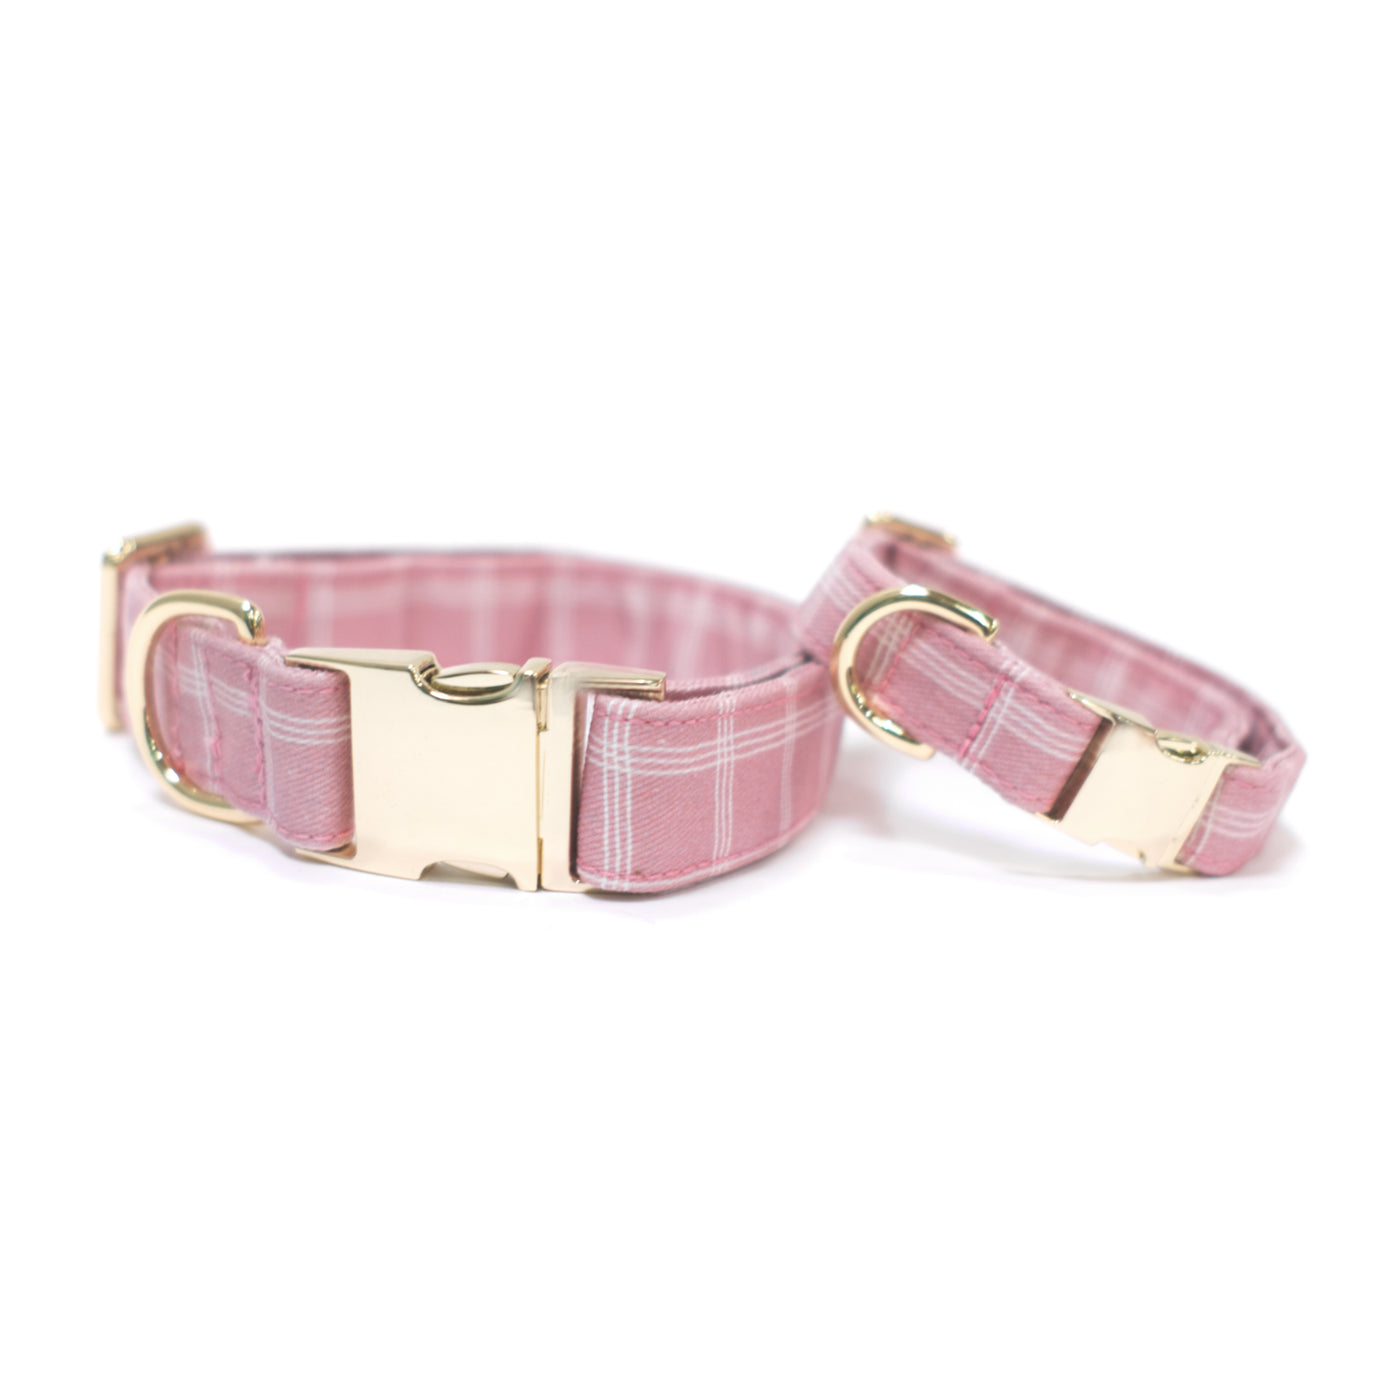 Blush pink triple windowpane plaid classic dog collars with gold hardware in sizes medium and small